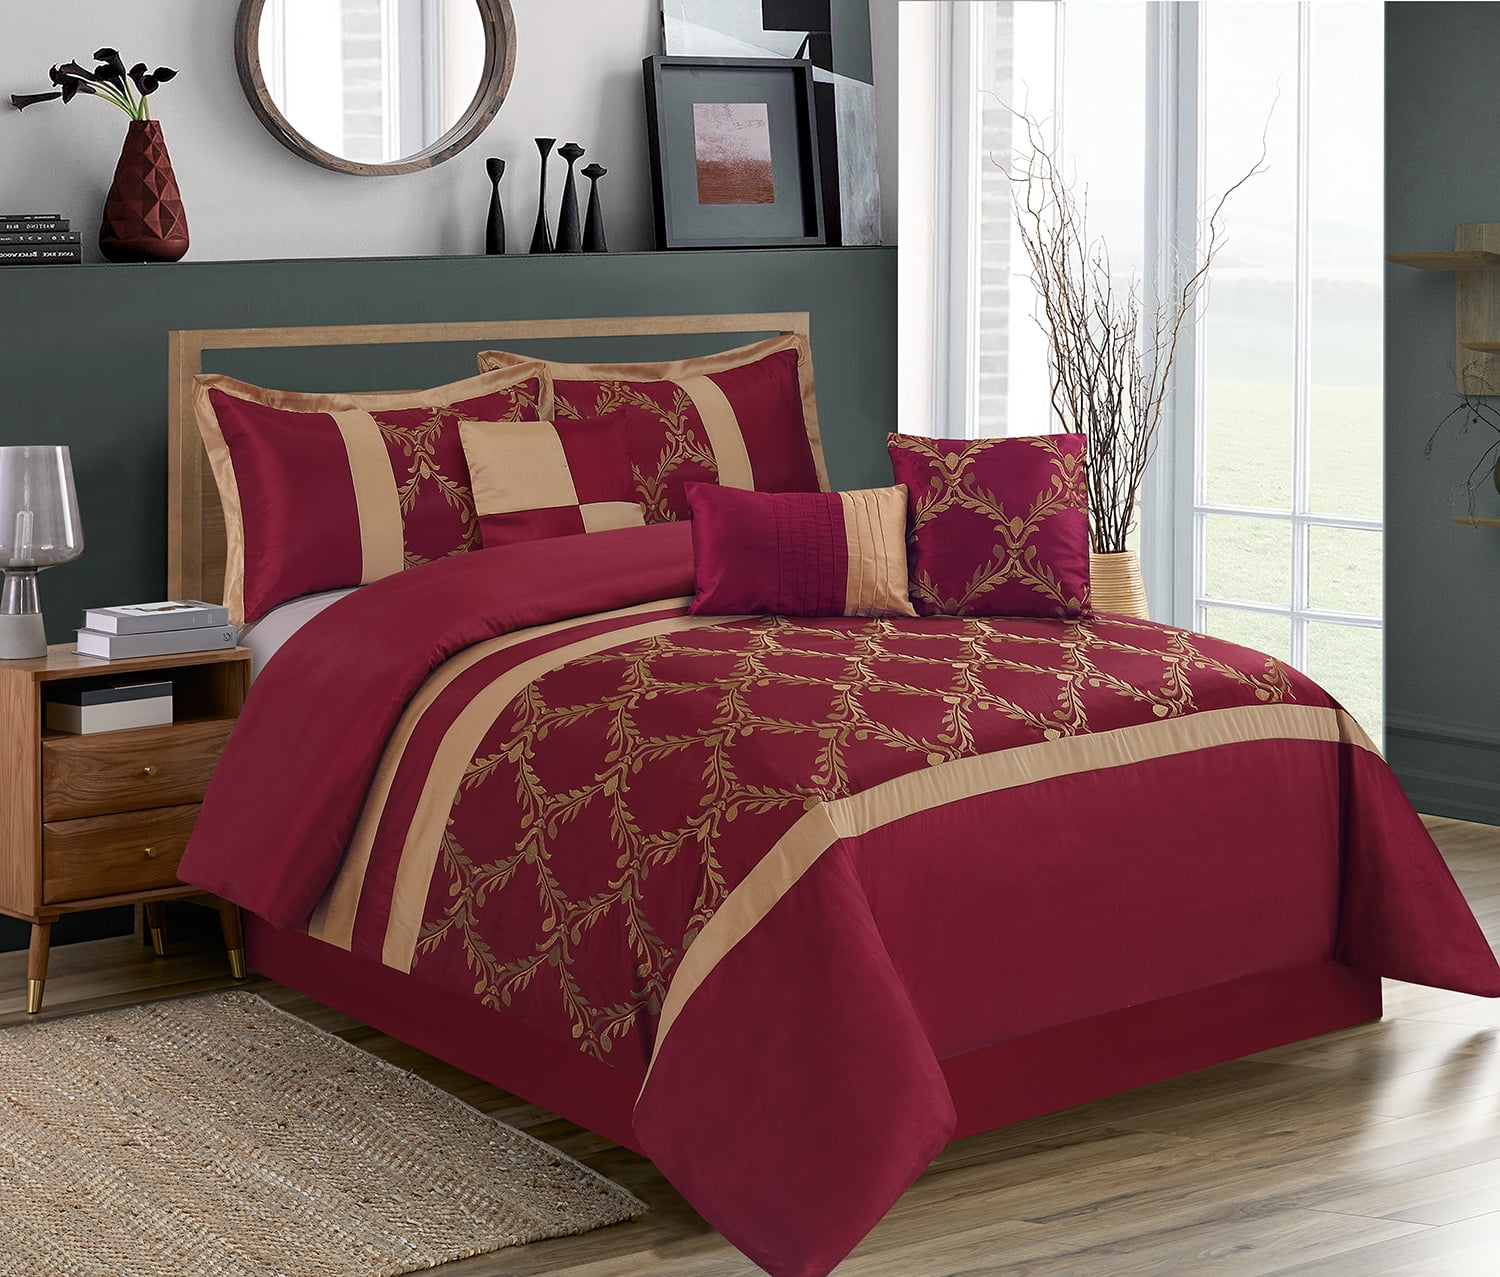 Bed-Bucket 100% Natural Cotton 800 Thread Count Hypoallergenic Design Wrinkle & Fade Resistant 88x88 Inch Full/Full XL/Queen Size Burgundy Solid Duvet Cover with Zipper Closer